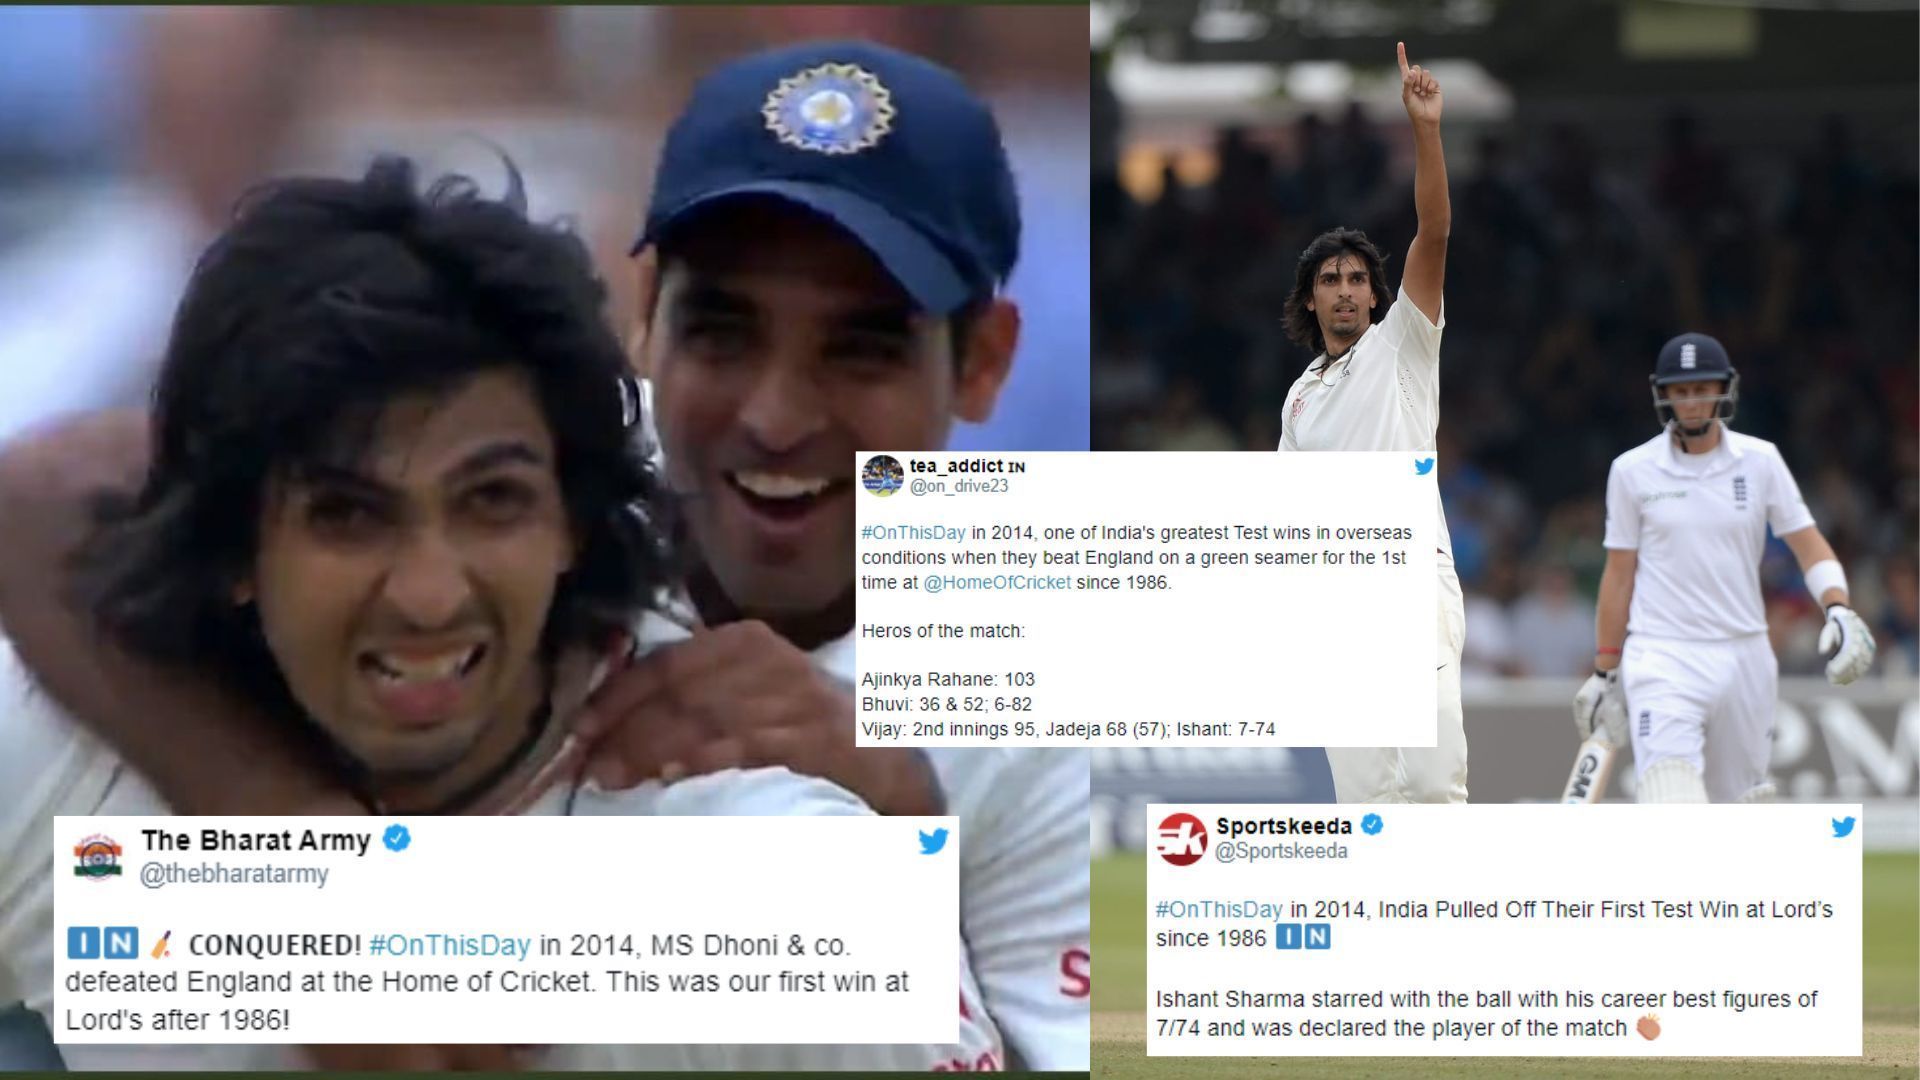 Ishant Sharma turned the game on its head by bagging best figures of 7/74. (P.C.:Twitter)